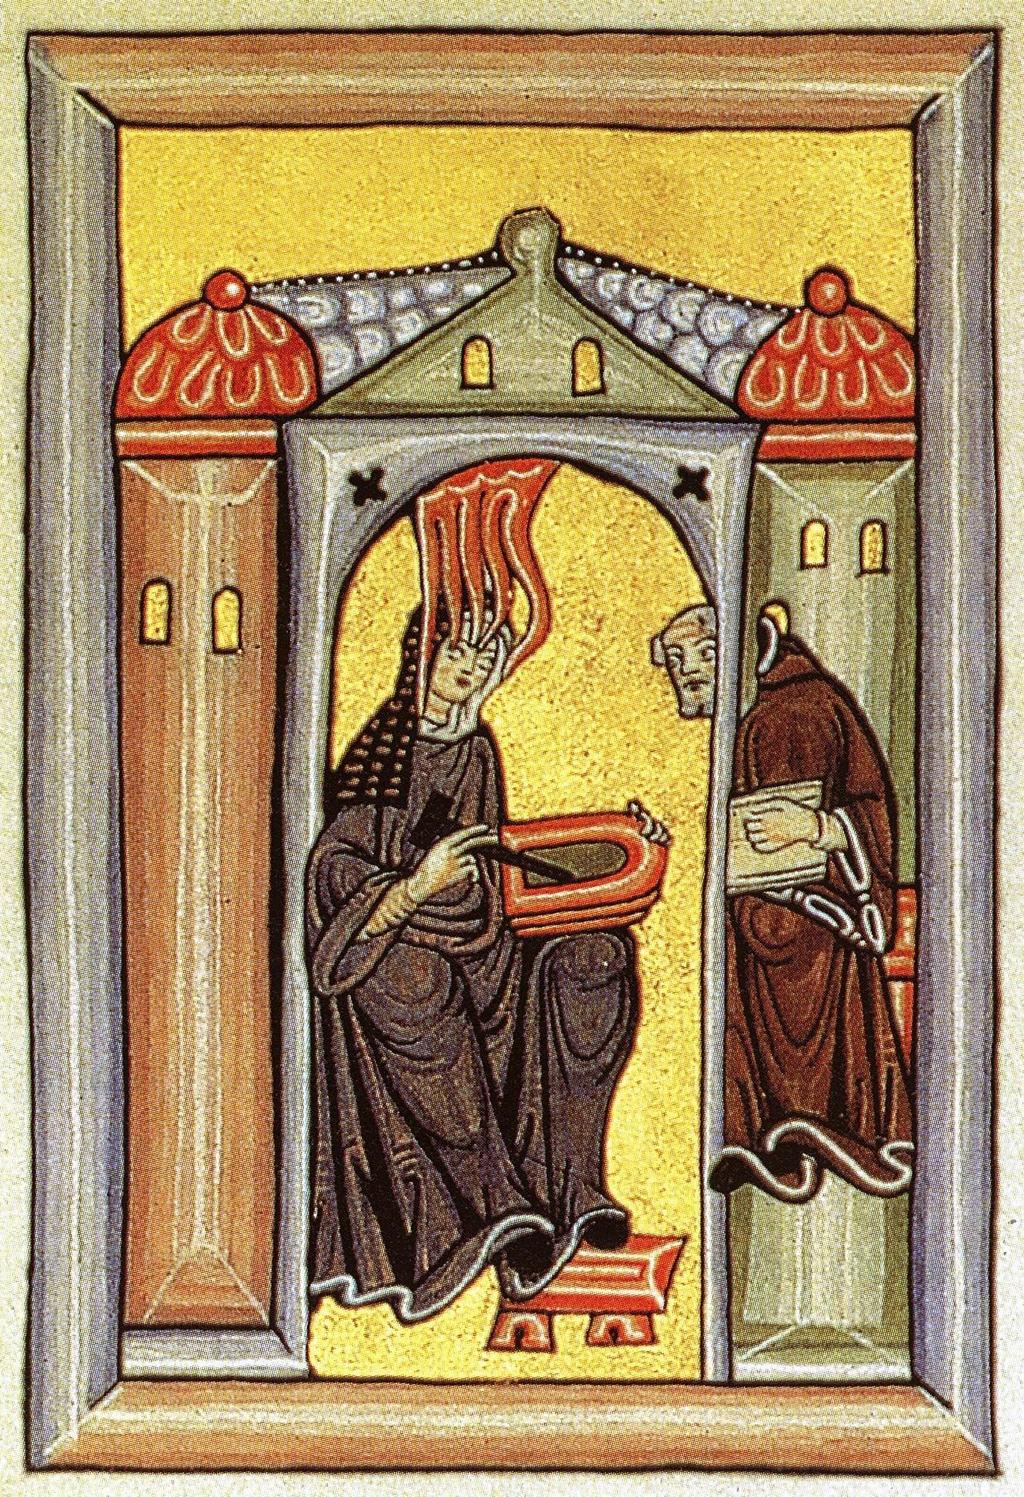 Holy Roman Empire Hildegard reveals her visions detail Rupertsberger Scivias, Germany 11501179 Hildegard was a nun who eventually became the abbess of the convent of Disibodenberg in the Rhineland